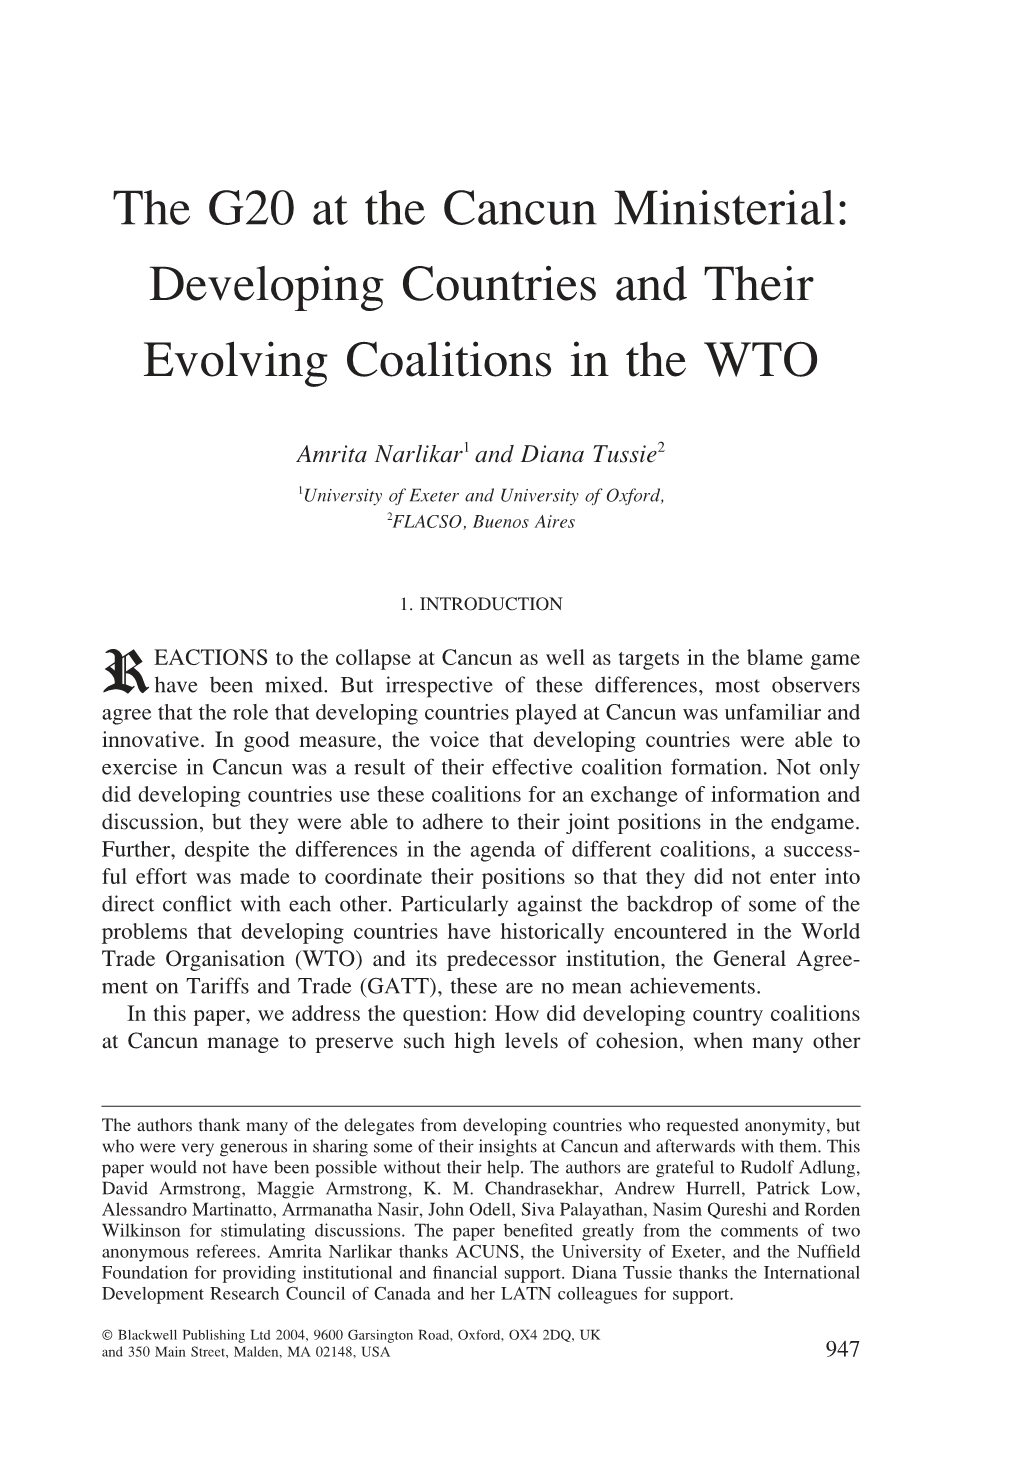 The G20 at the Cancun Ministerial: Developing Countries and Their Evolving Coalitions in the WTO